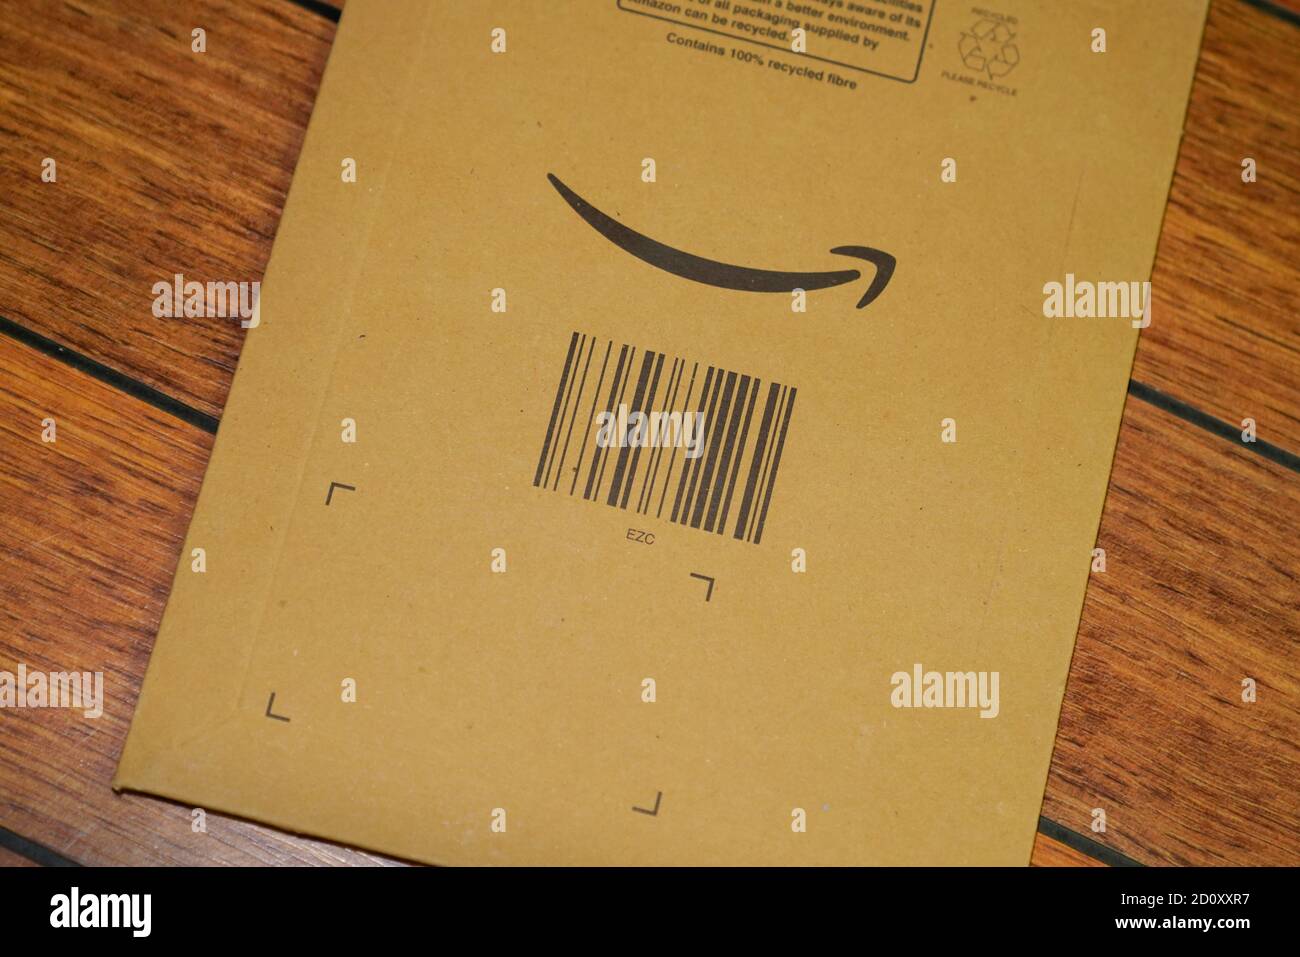 Bordeaux , Aquitaine / France - 09 25 2020 : Amazon logo with sign arrow smiling printed on envelope brown cardboard Stock Photo